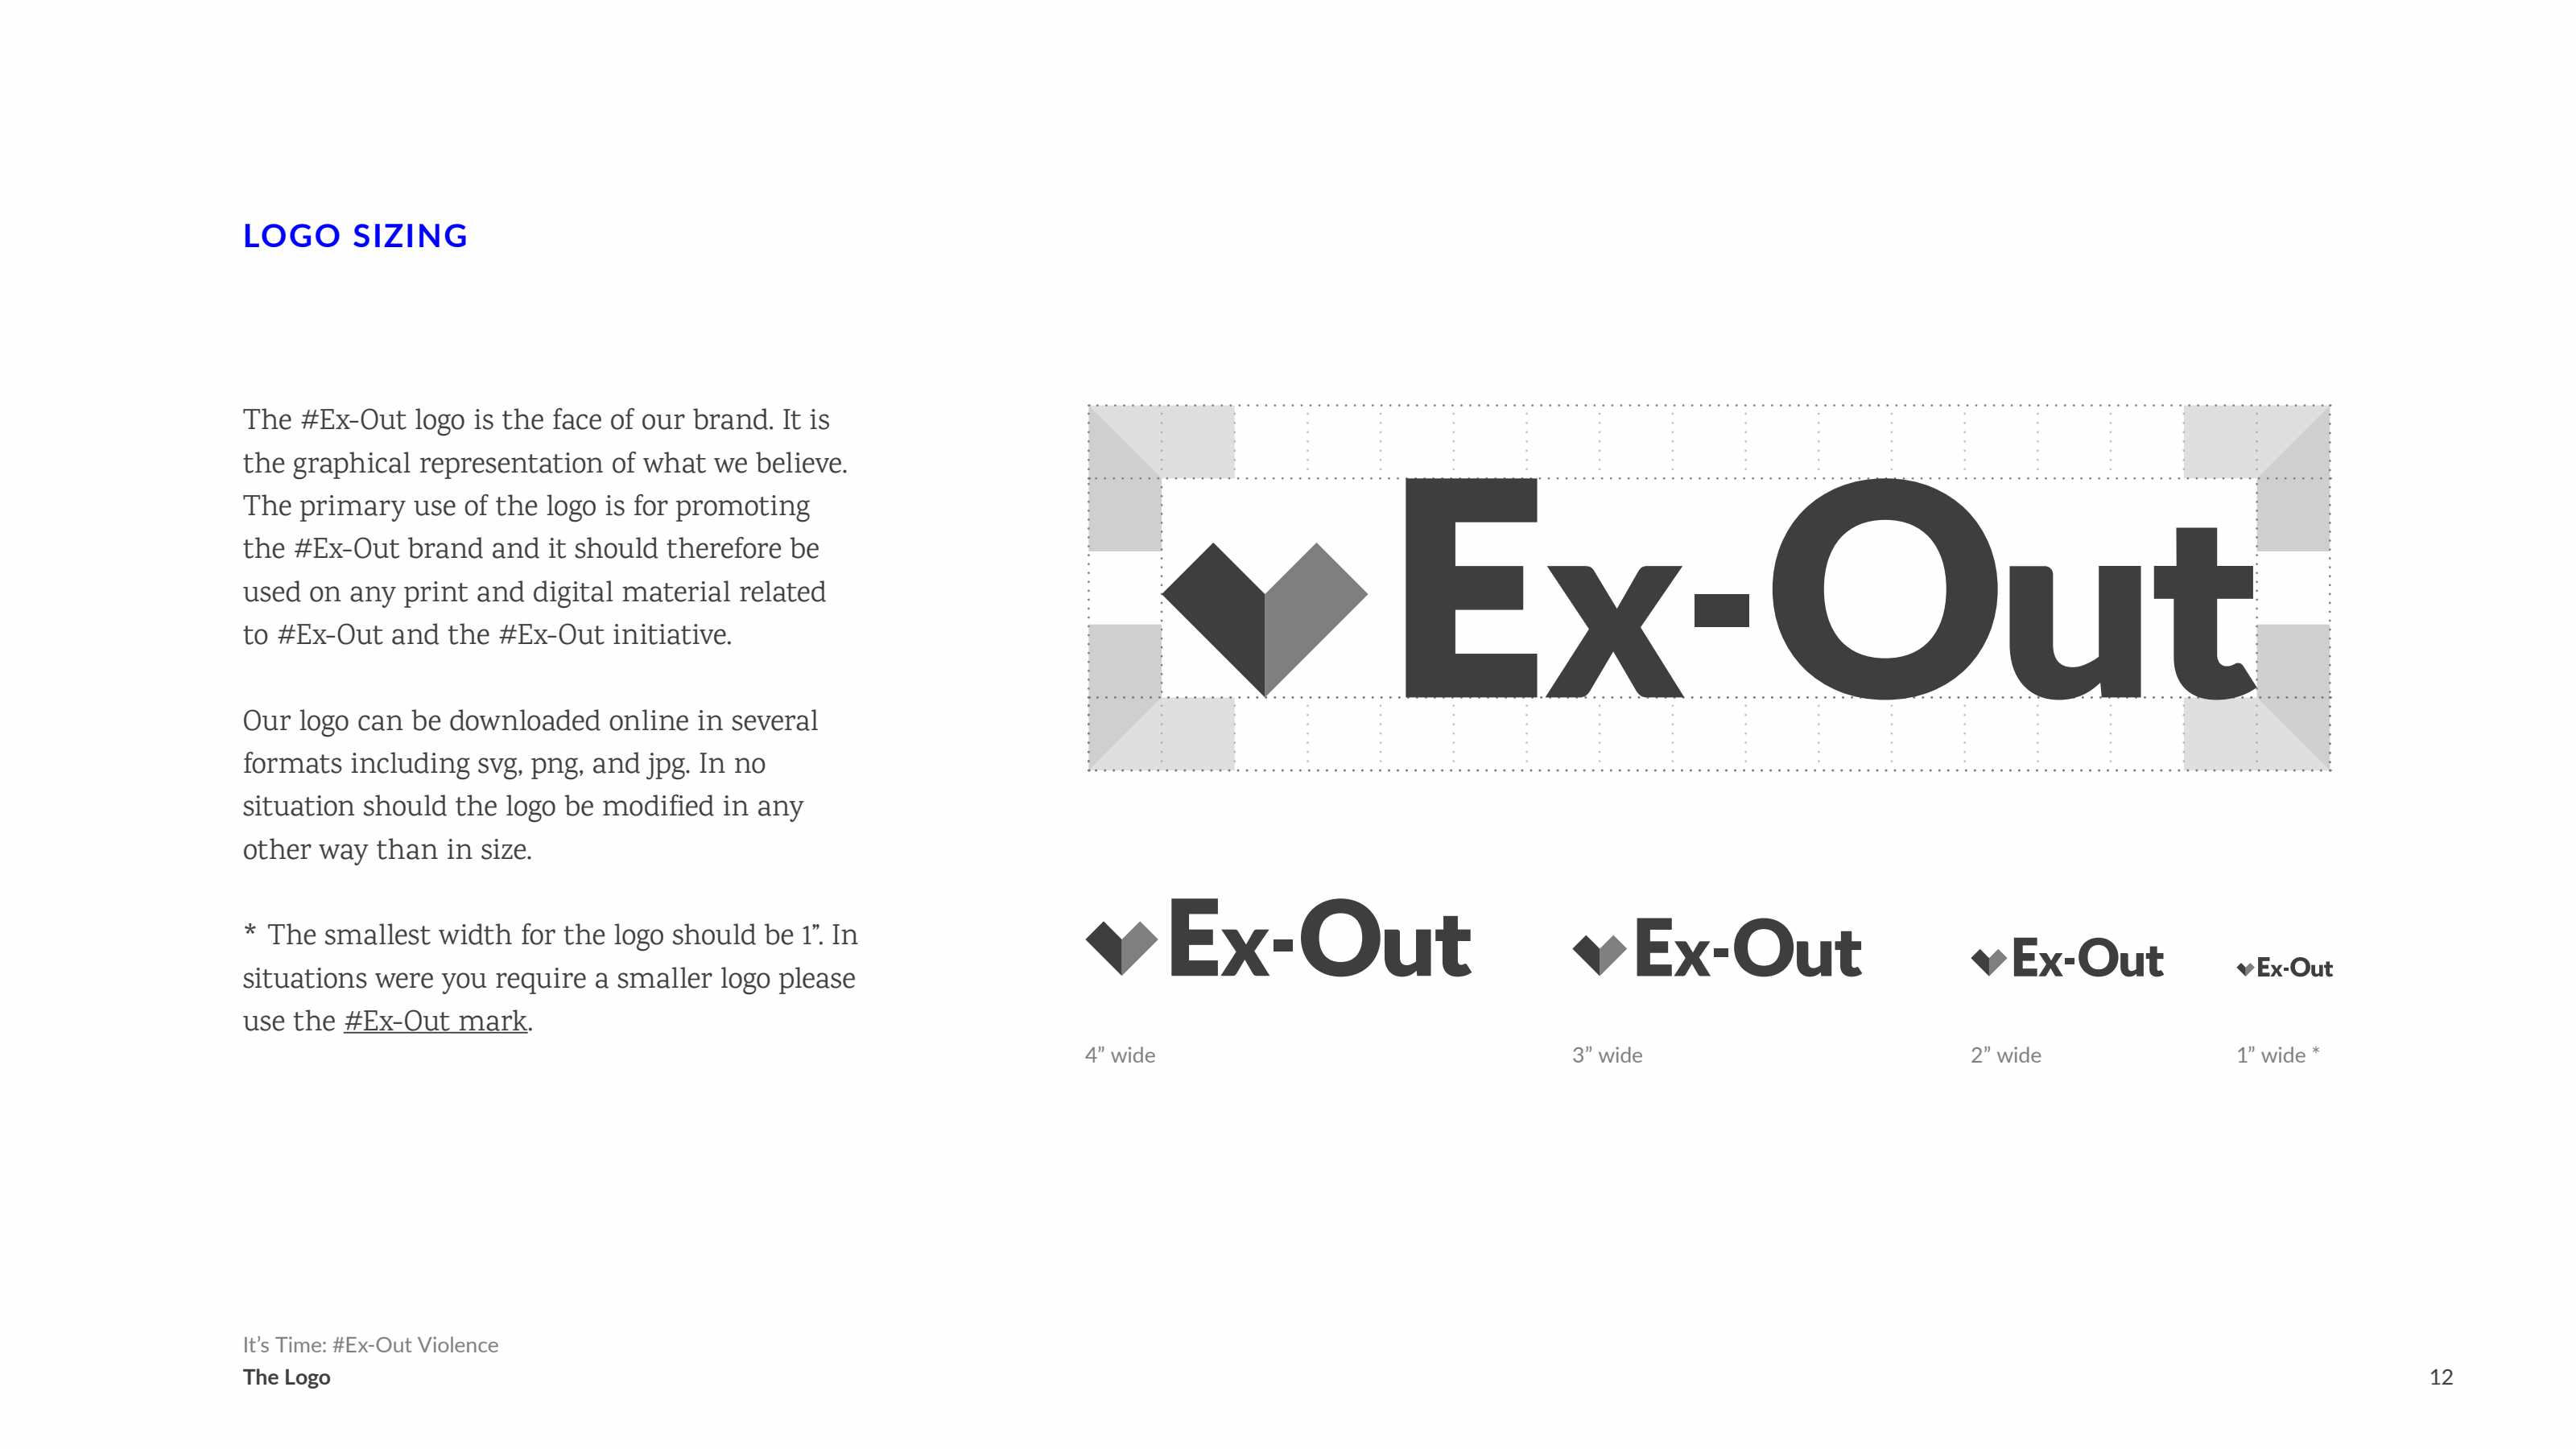 Ex-Out Brand Guide Page 12. Please download the PDF for an accessible read.